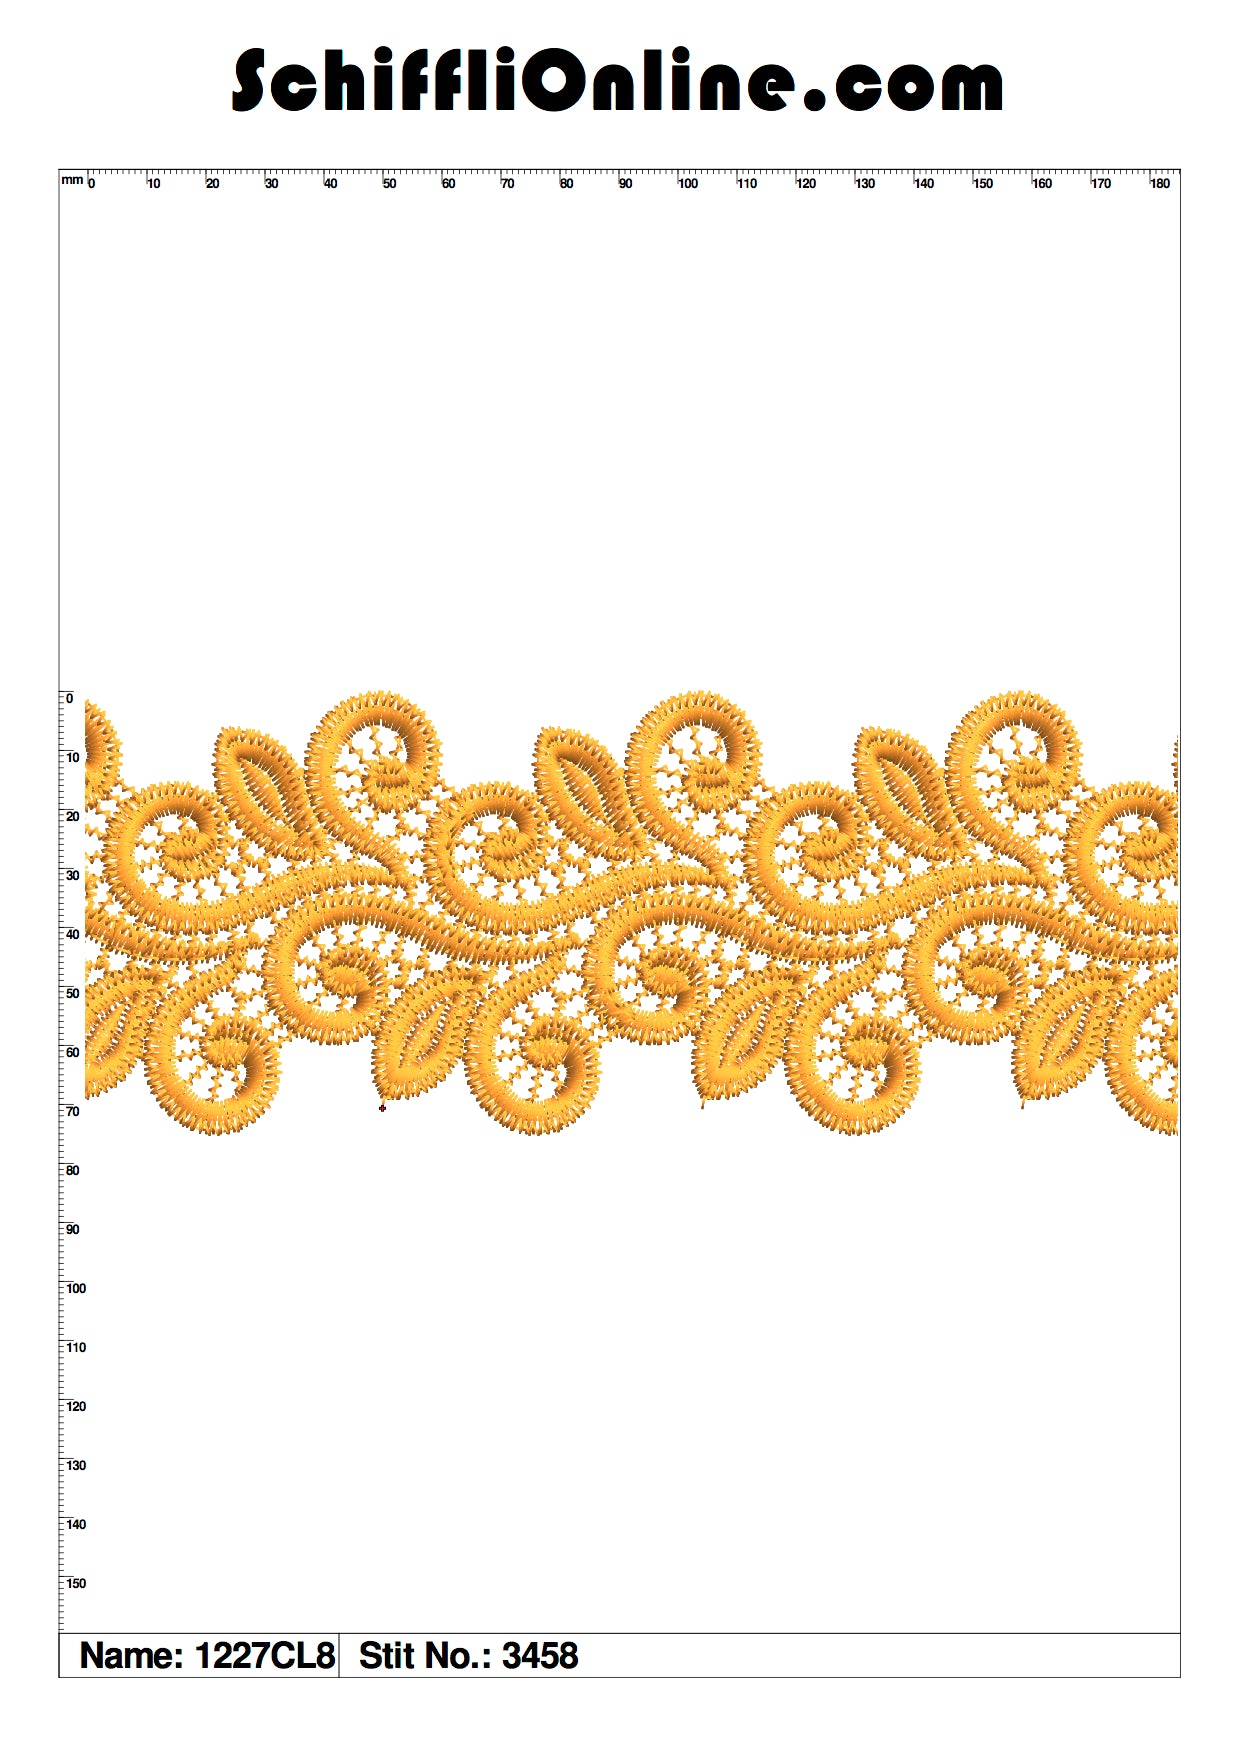 Book 141 CHEMICAL LACE 8X4 50 DESIGNS